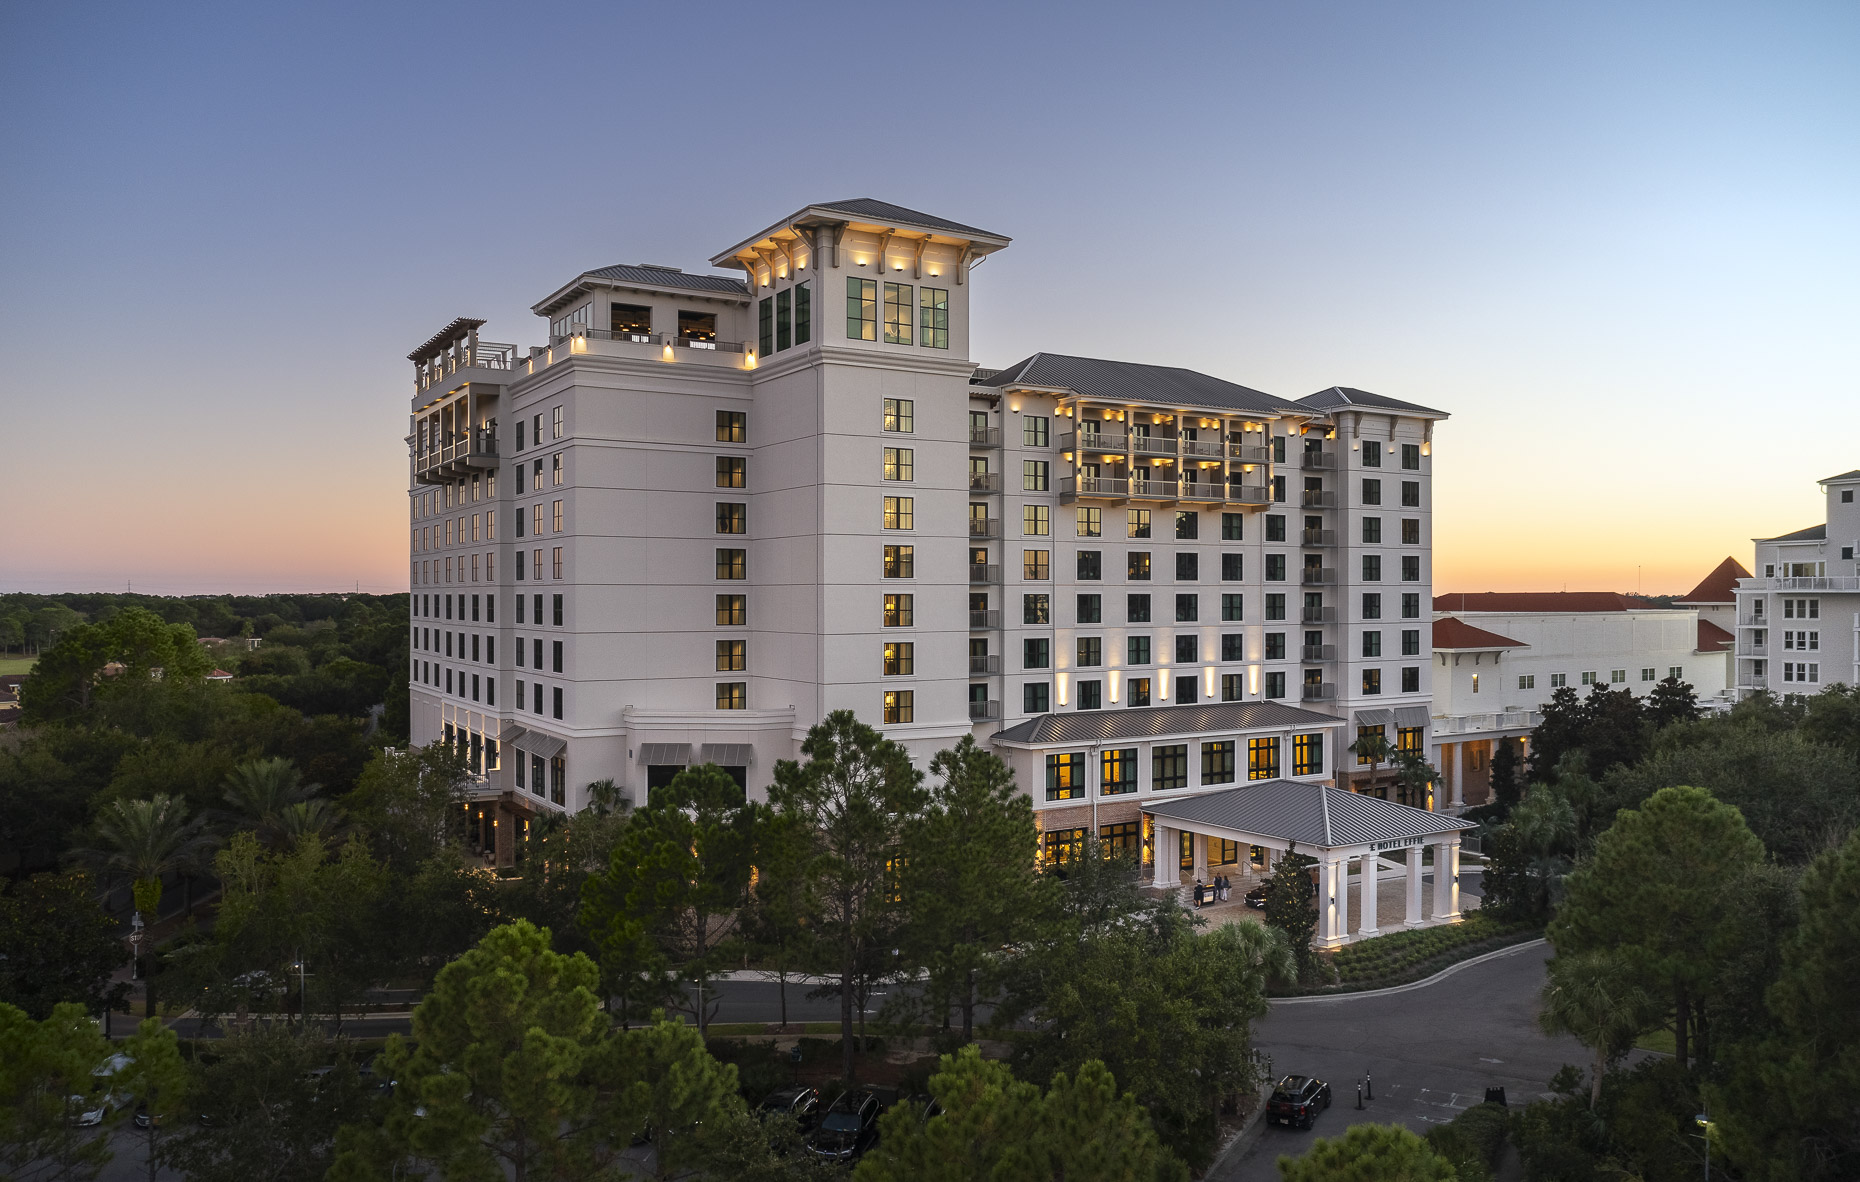 Hotel Effie Sandestin by Cooper Carry photographed by Brad Feinknopf based in Columbus, Ohio